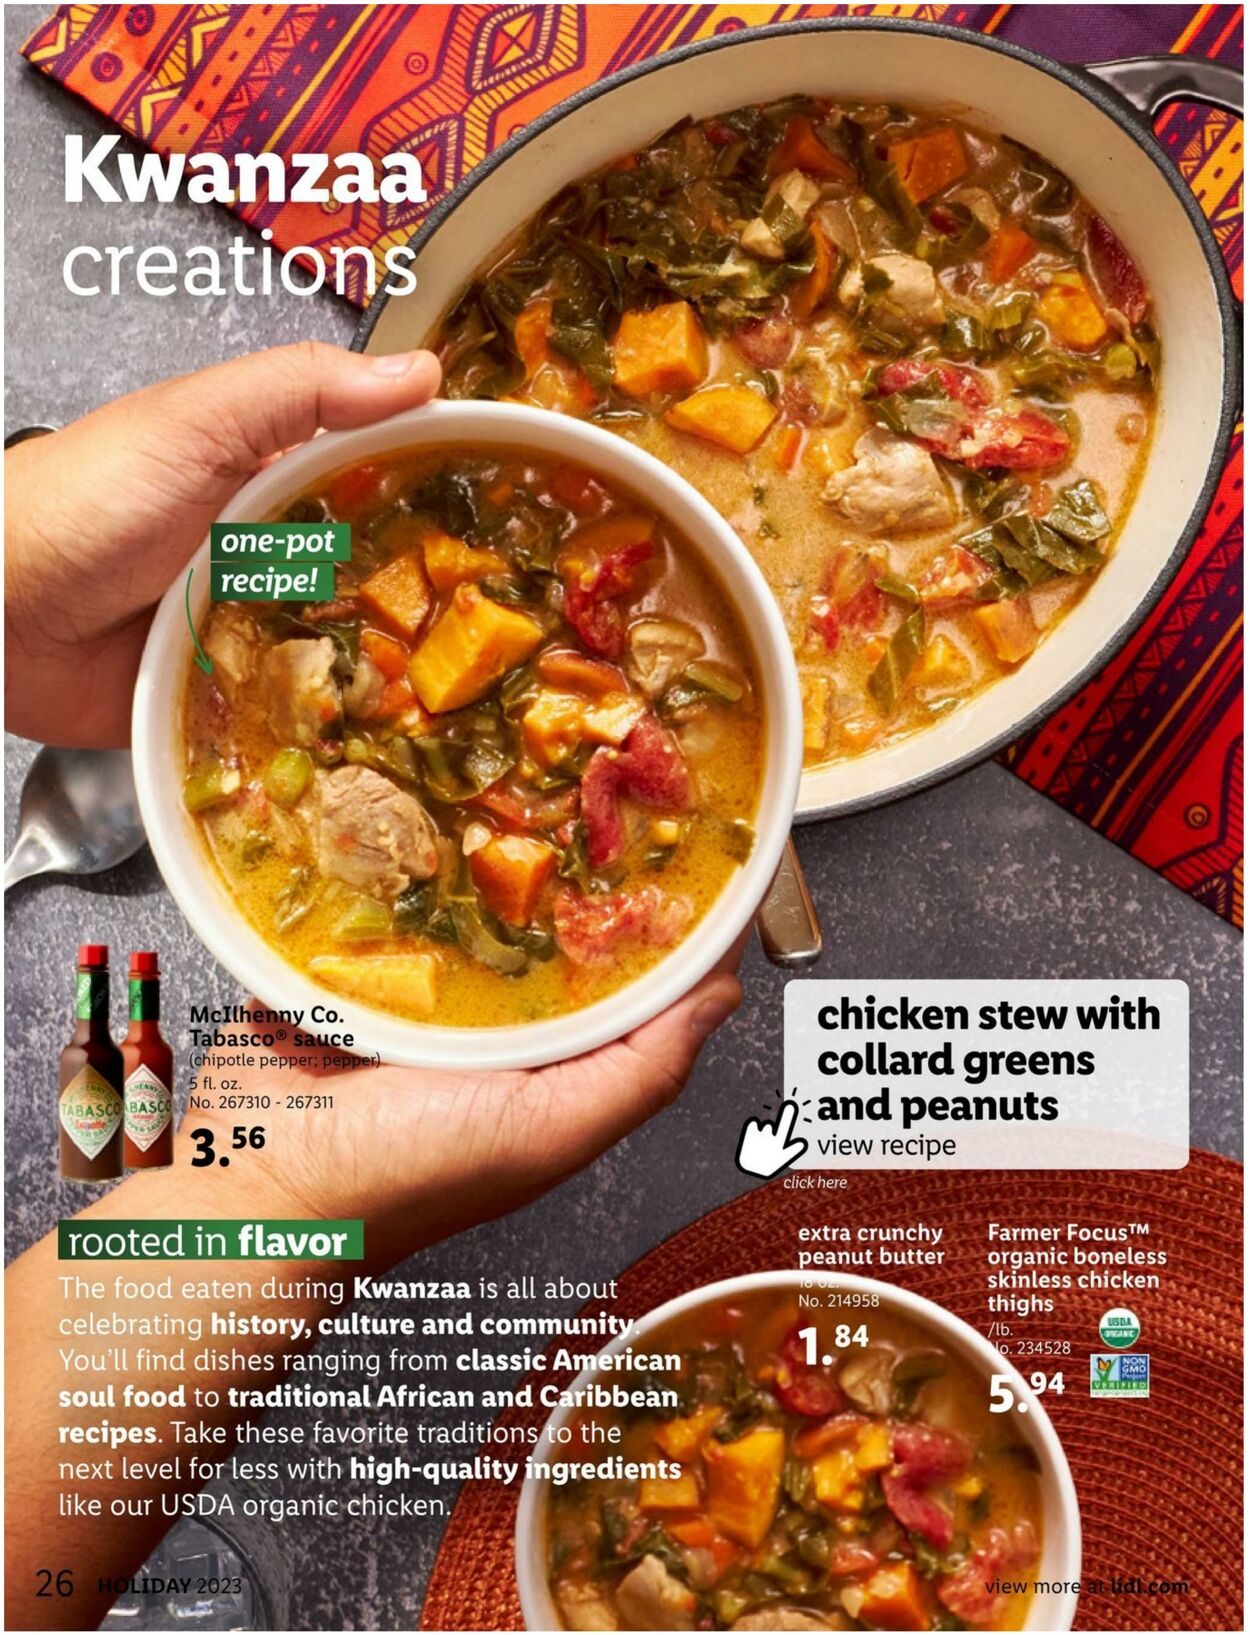 Catalogue Lidl from 11/29/2023